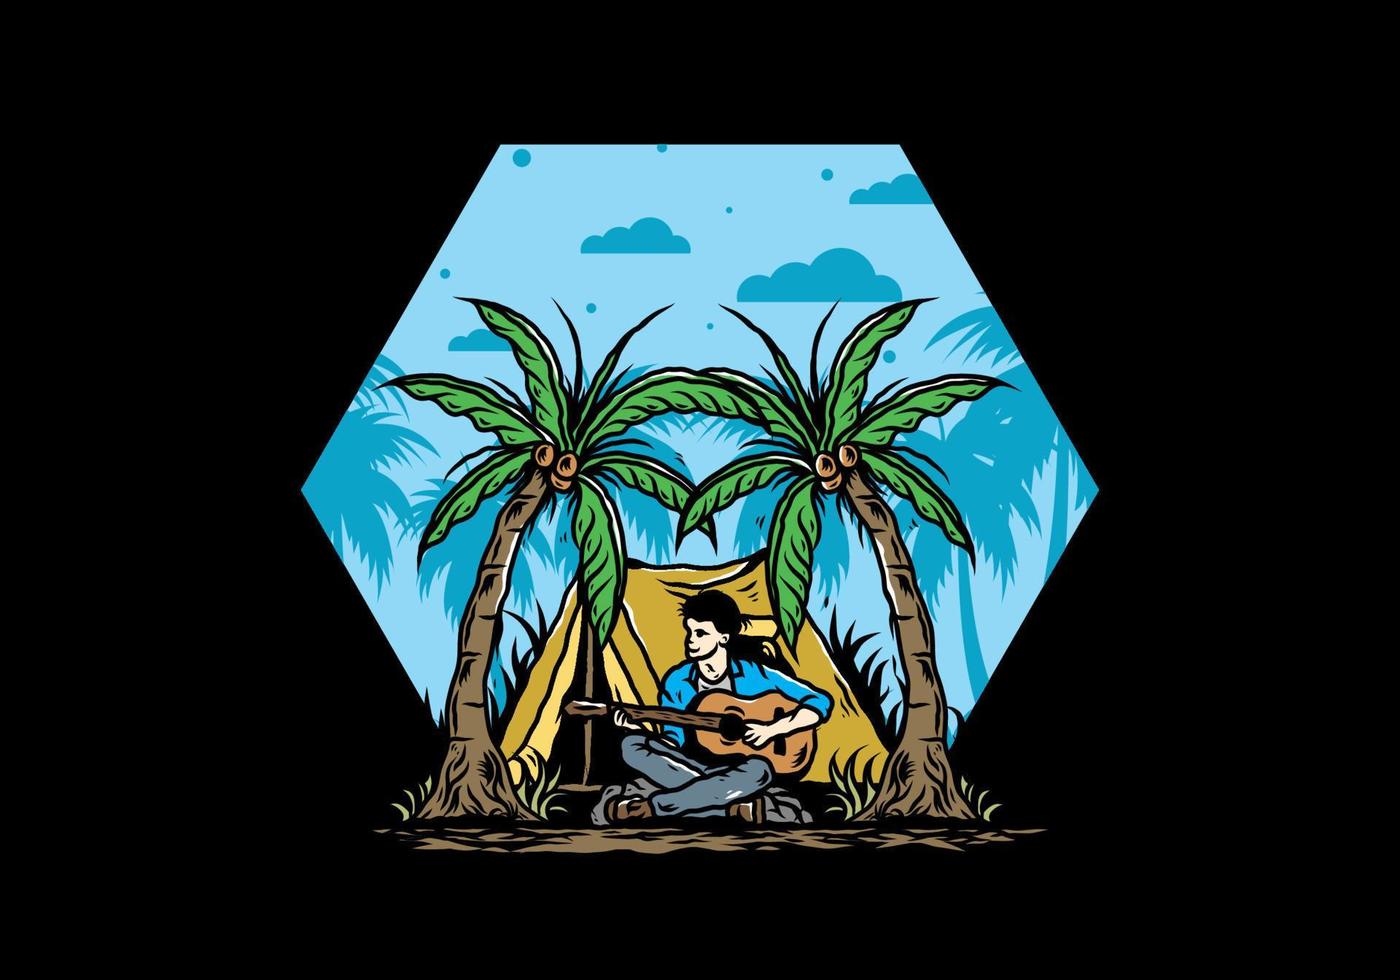 Man with guitar in front of tent between coconut tree illustration vector